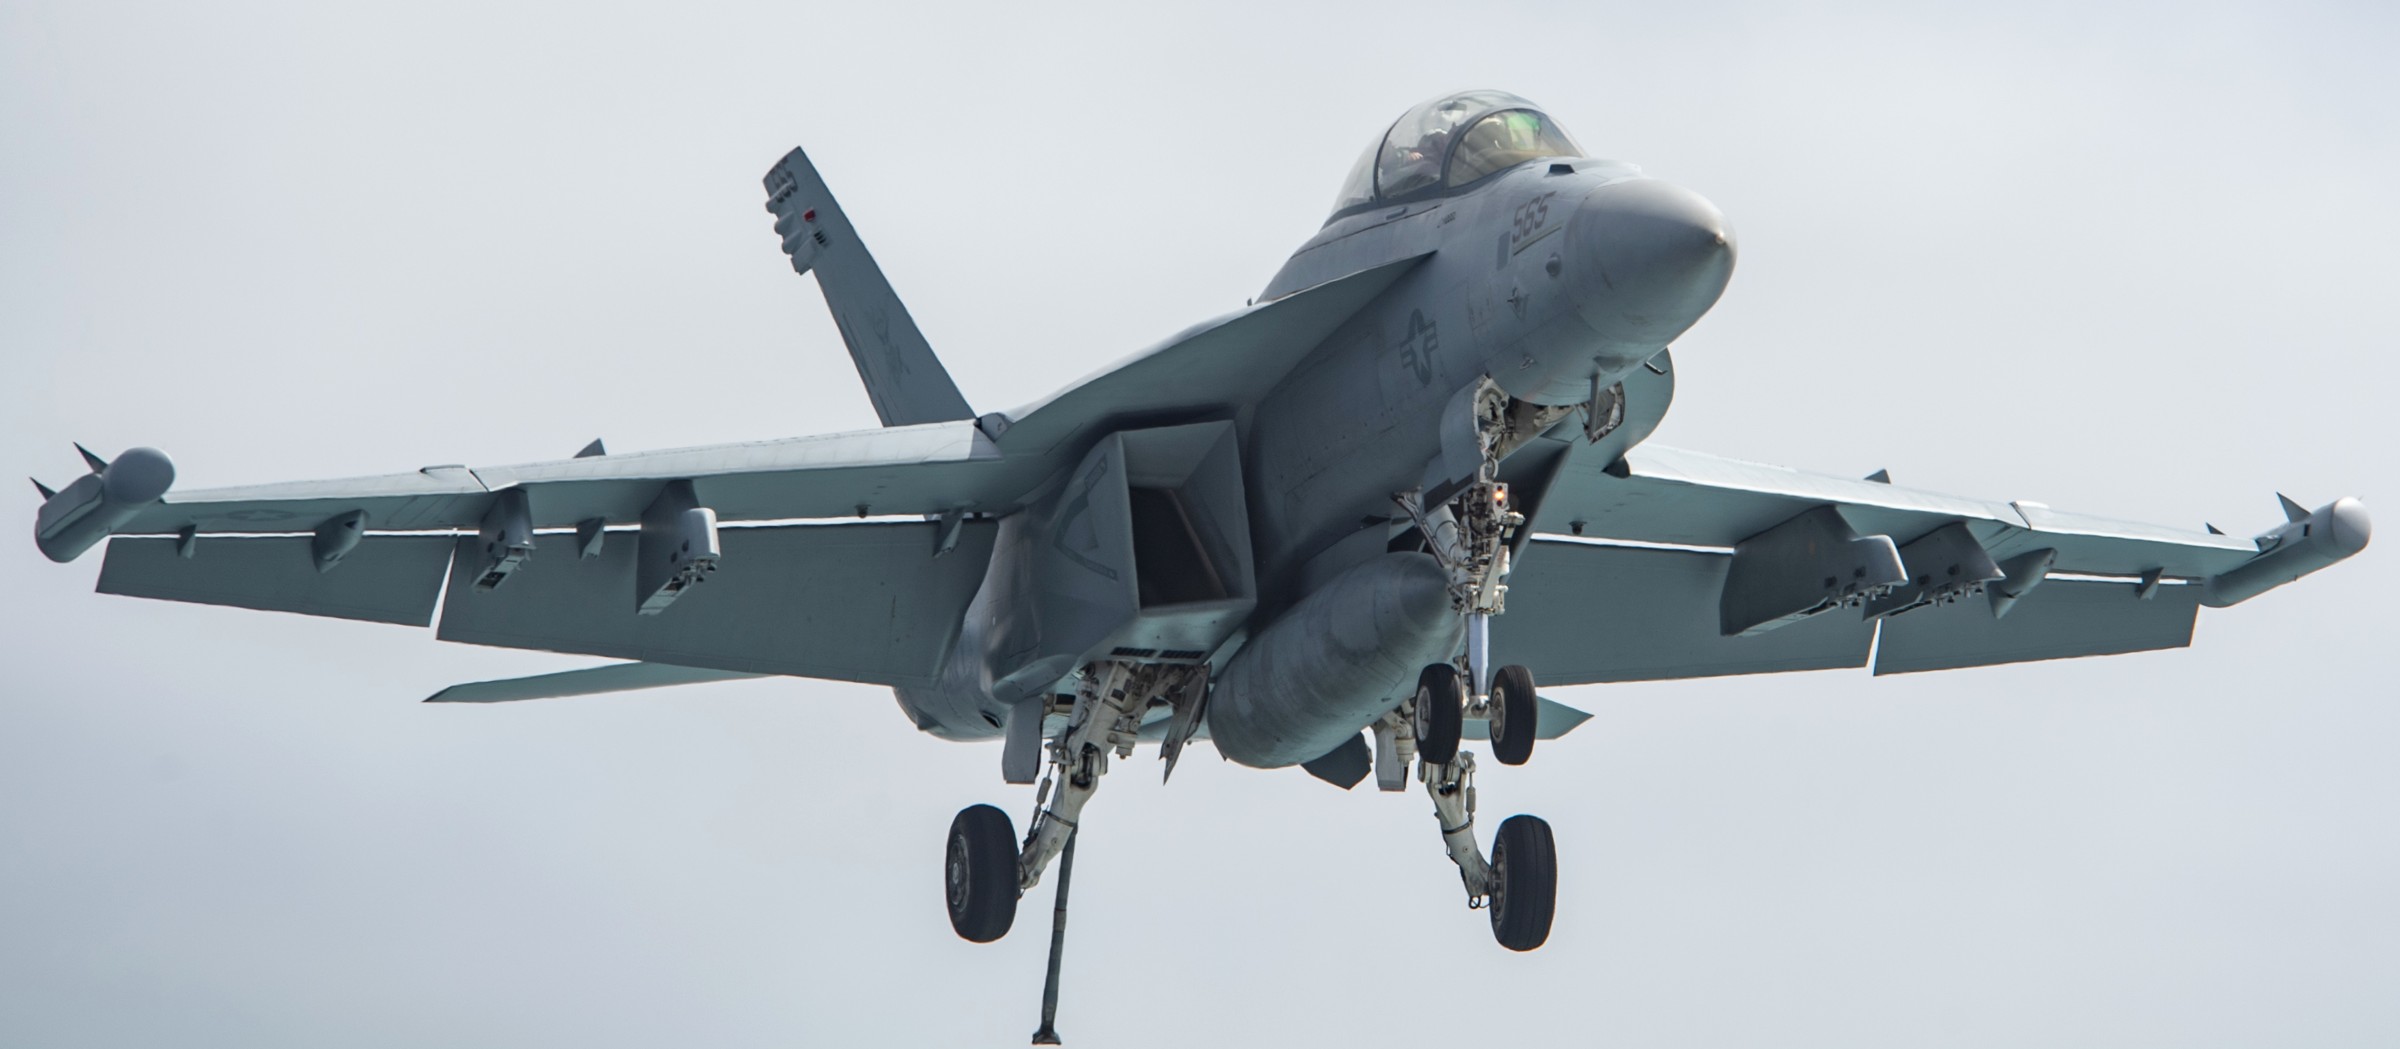 vaq-129 vikings electronic attack squadron fleet replacement frs us navy ea-18g growler 52